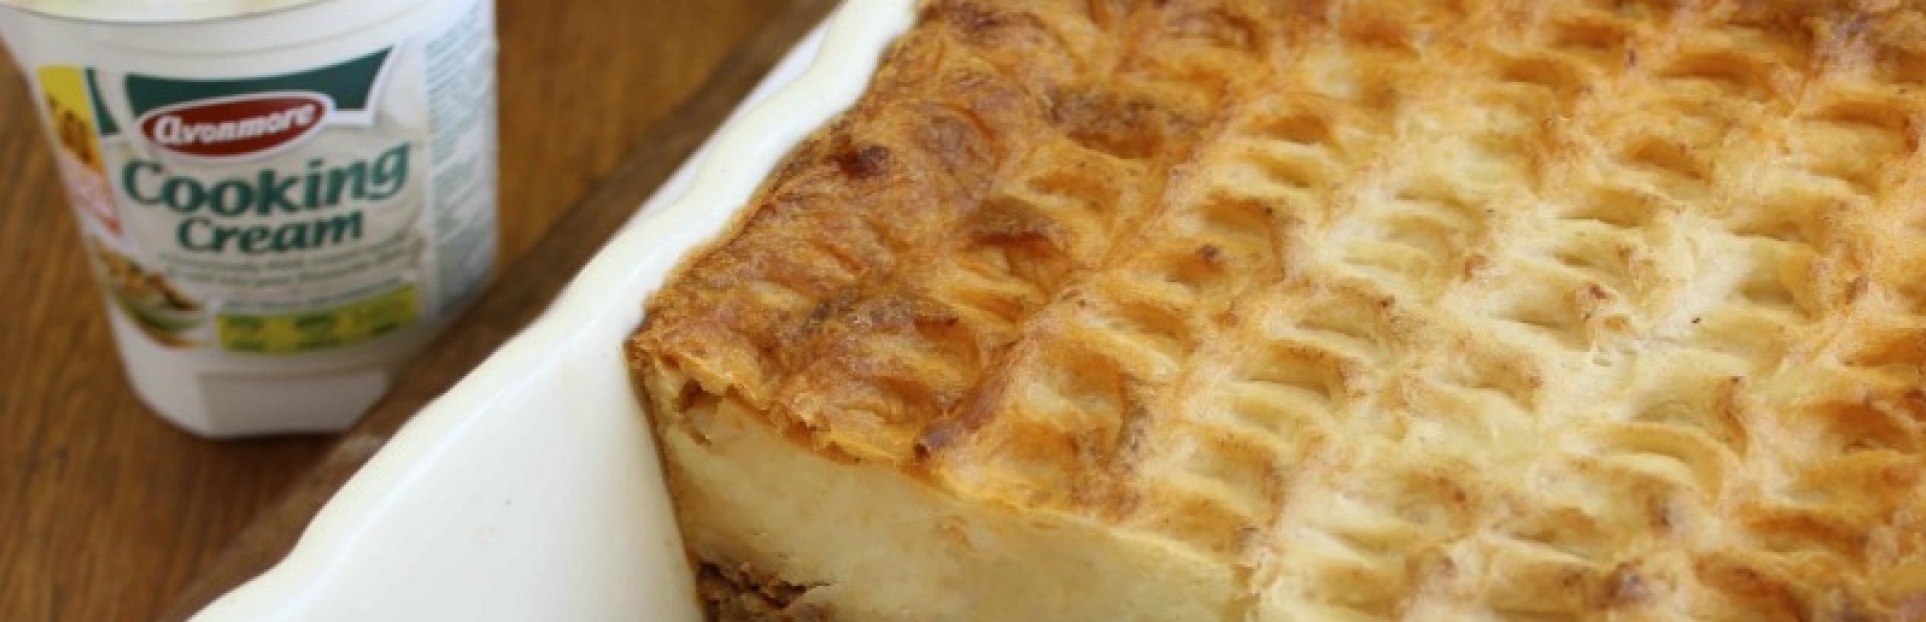 An image of a baked cottage pie with a pot of cooking cream beside it 